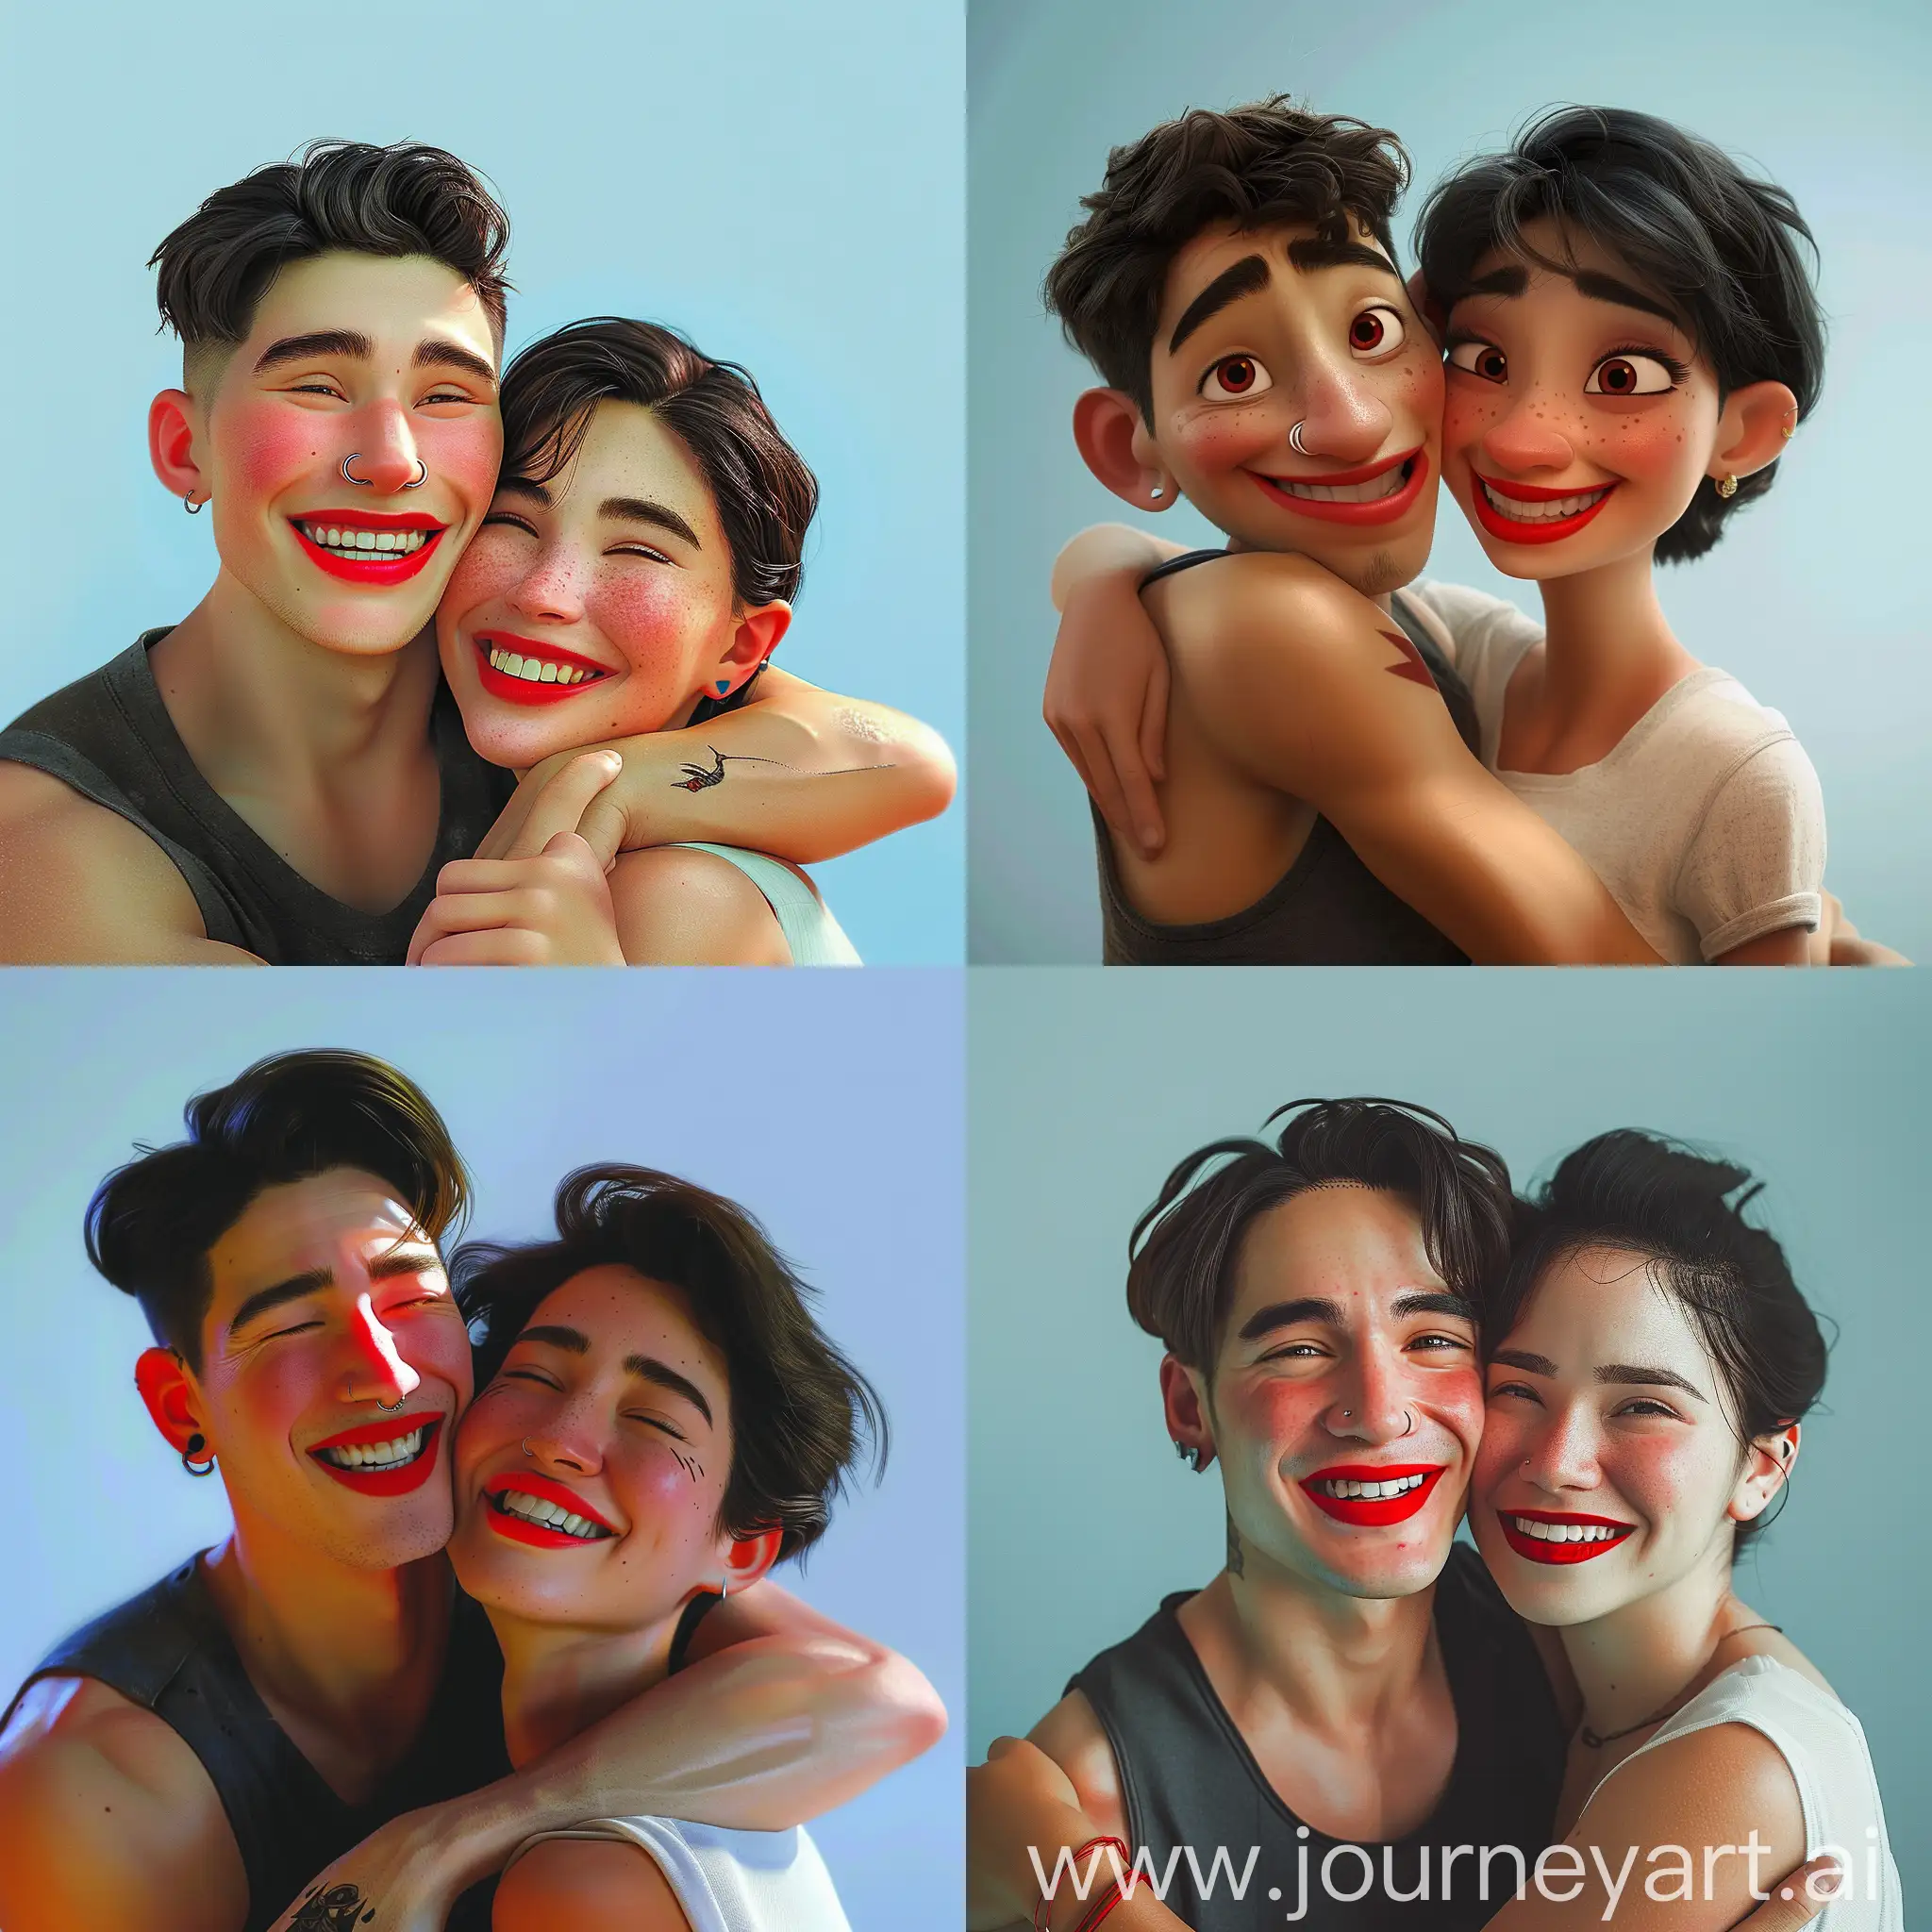 Scene from Pixar cartoon movie Two people are hugging, smiling at the camera. On the left, a young man with short, dark hair, a rectangular-shaped head, and a defined jawline is wearing red lipstick. He has a nose ring, an earring in his right ear, and is dressed in a dark gray tank top. On the right, a woman with dark hair highlighted with some lighter streaks is also wearing red lipstick. She has small earrings and is dressed in a plain white T-shirt. The background of the image is light blue, and both characters are smiling broadly, conveying a sense of joy and affection.scene from Pixar cartoon movie